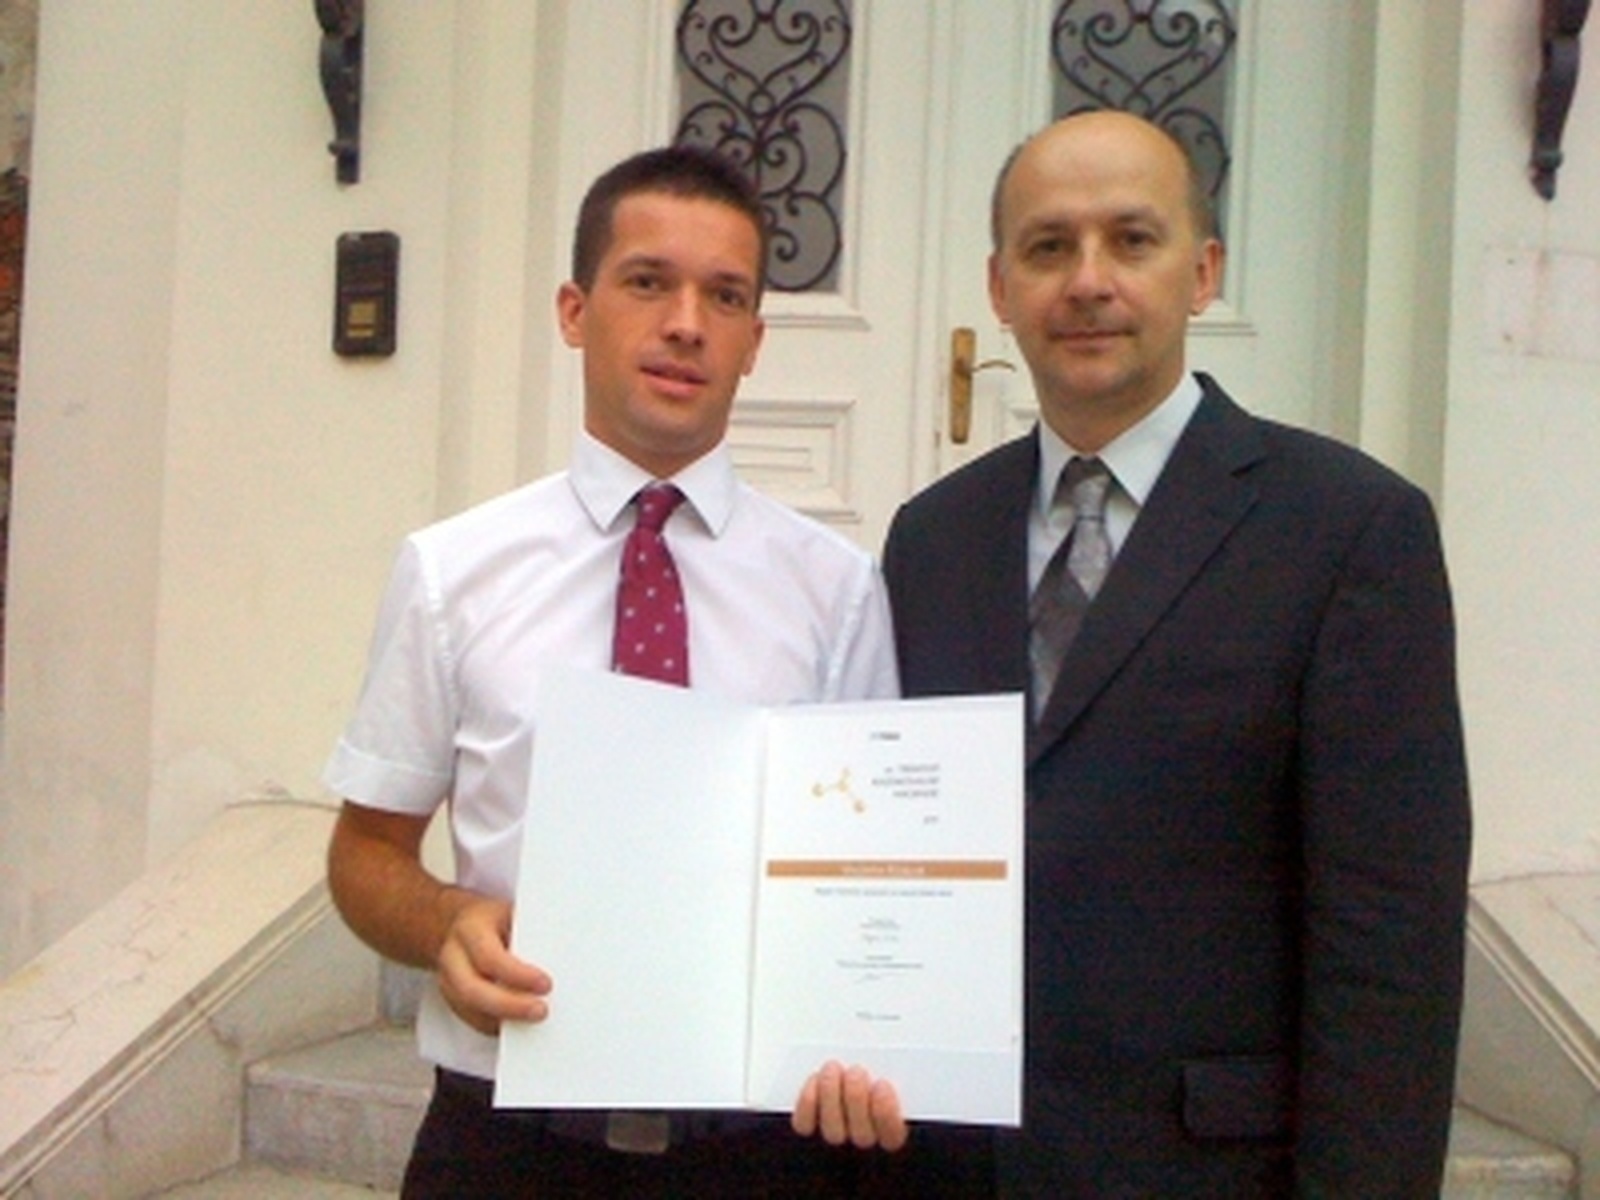 "10th Trimo Research Award 2011" awarded to graduate of the School of Engineering and Management of the University of Nova Gorica"